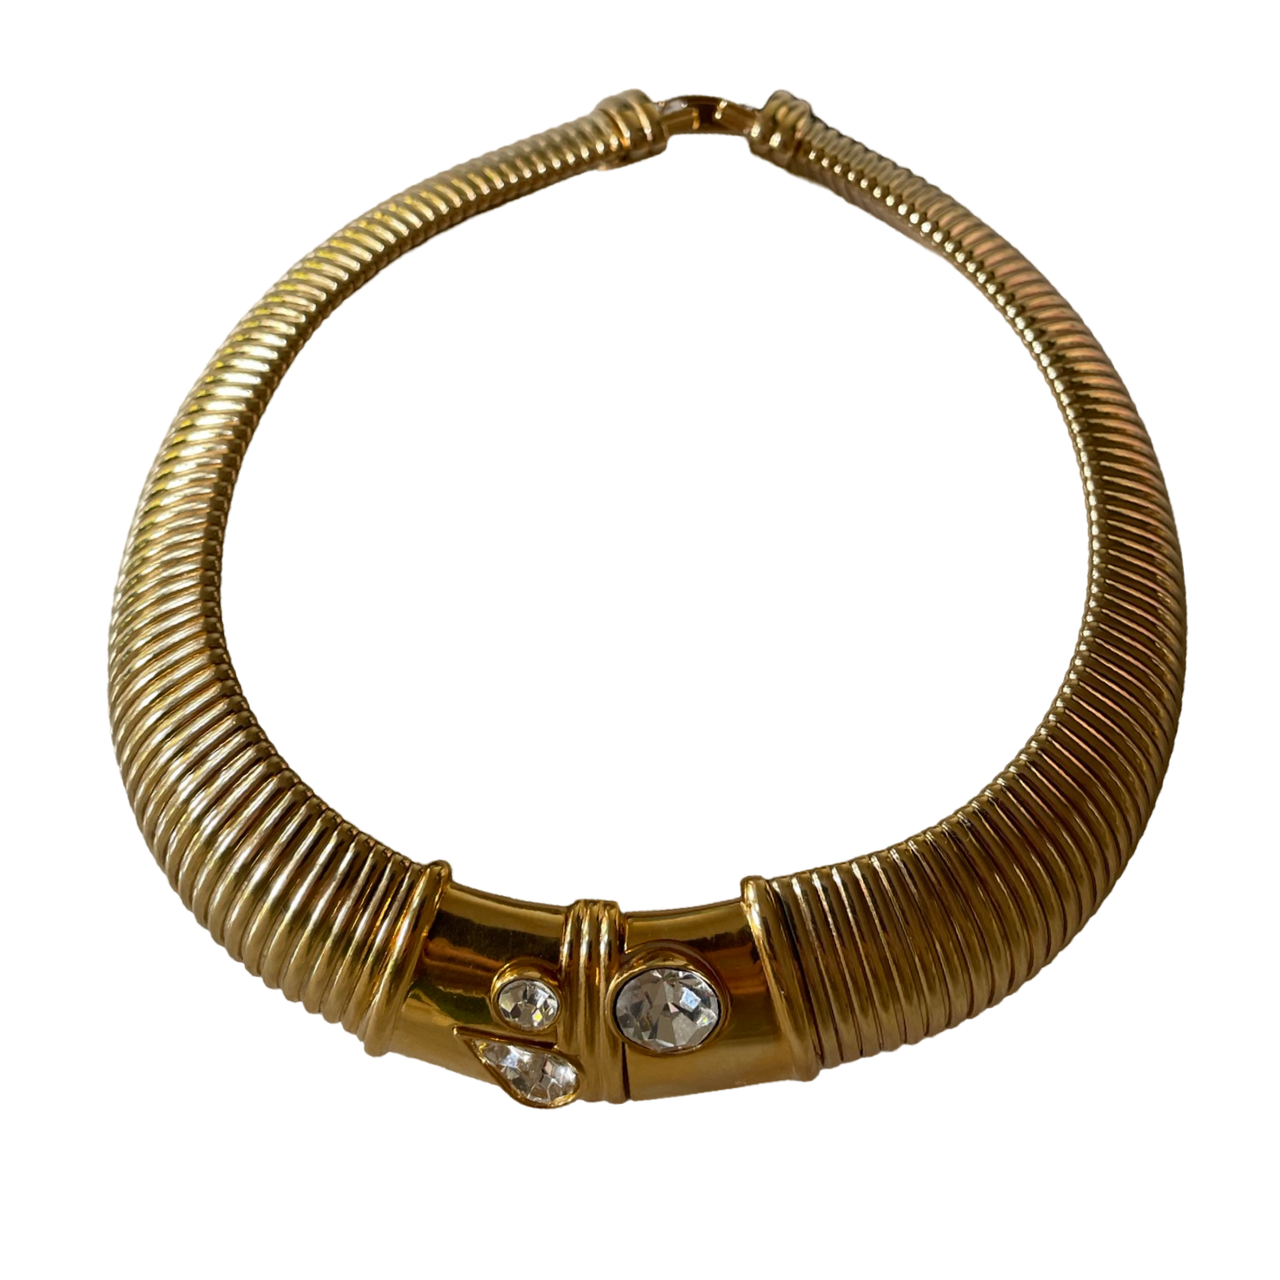 Givenchy 80s statement choker necklace